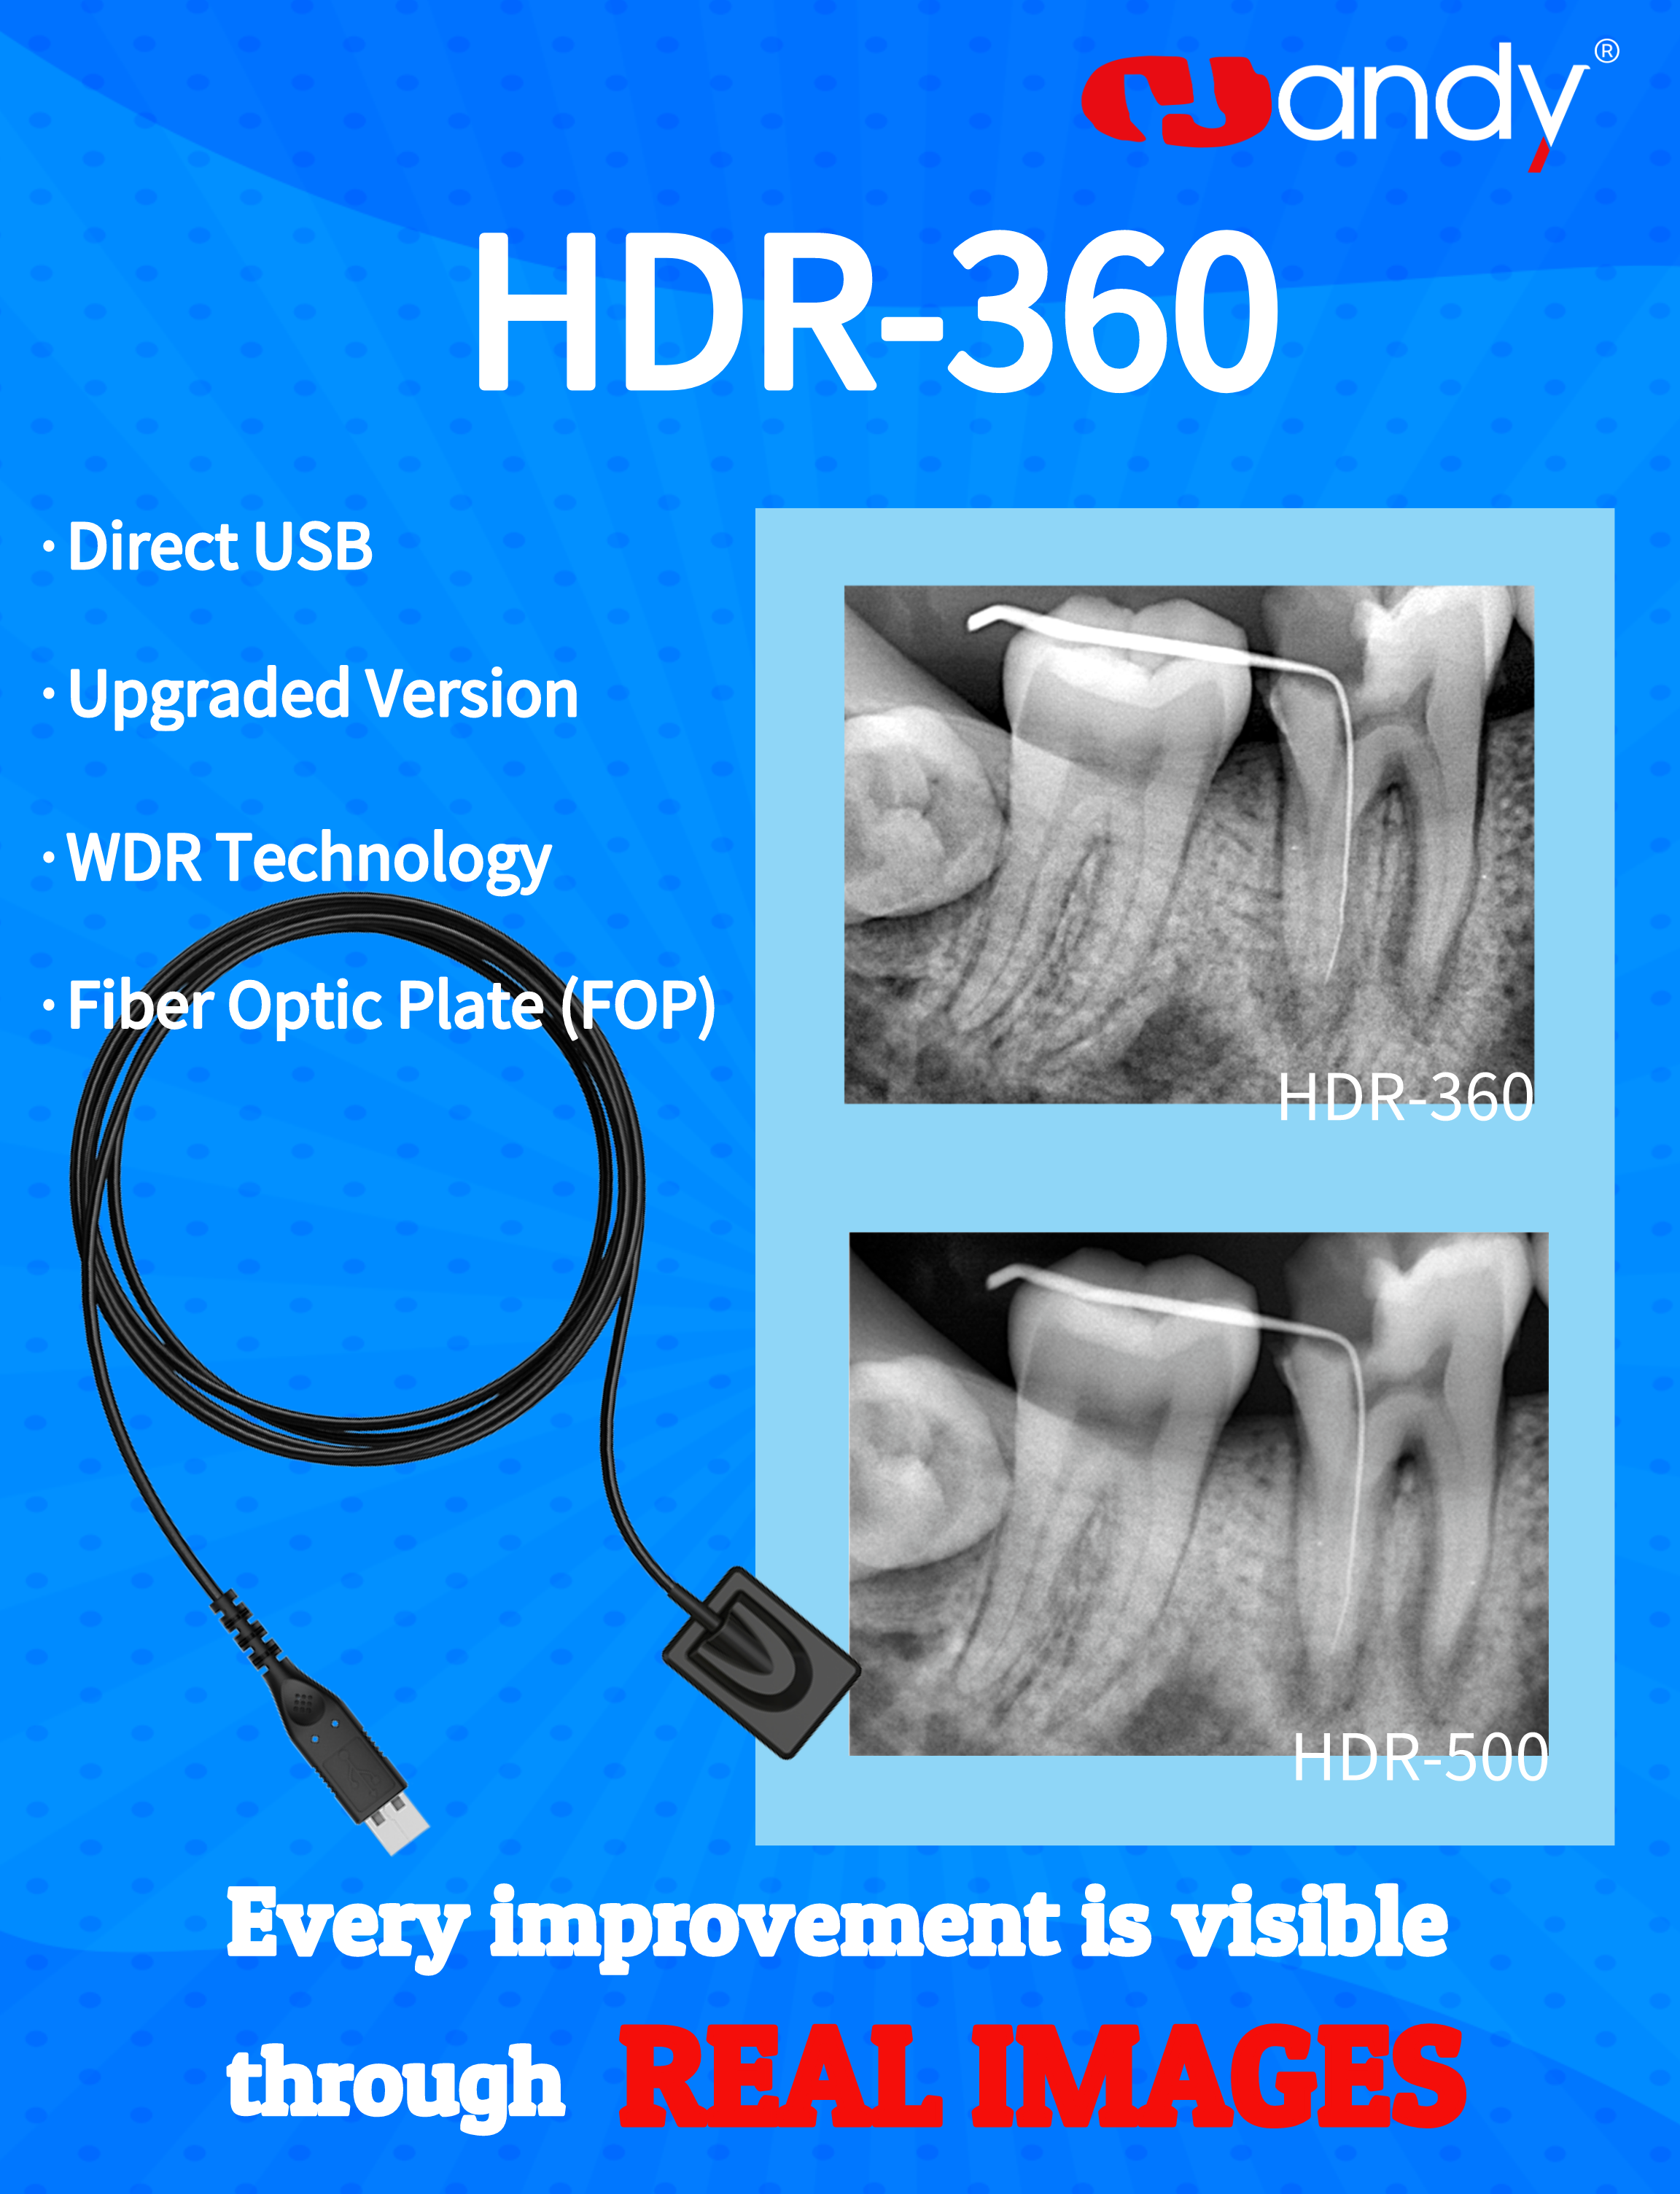 HDR-360/460 is on the hot sale!